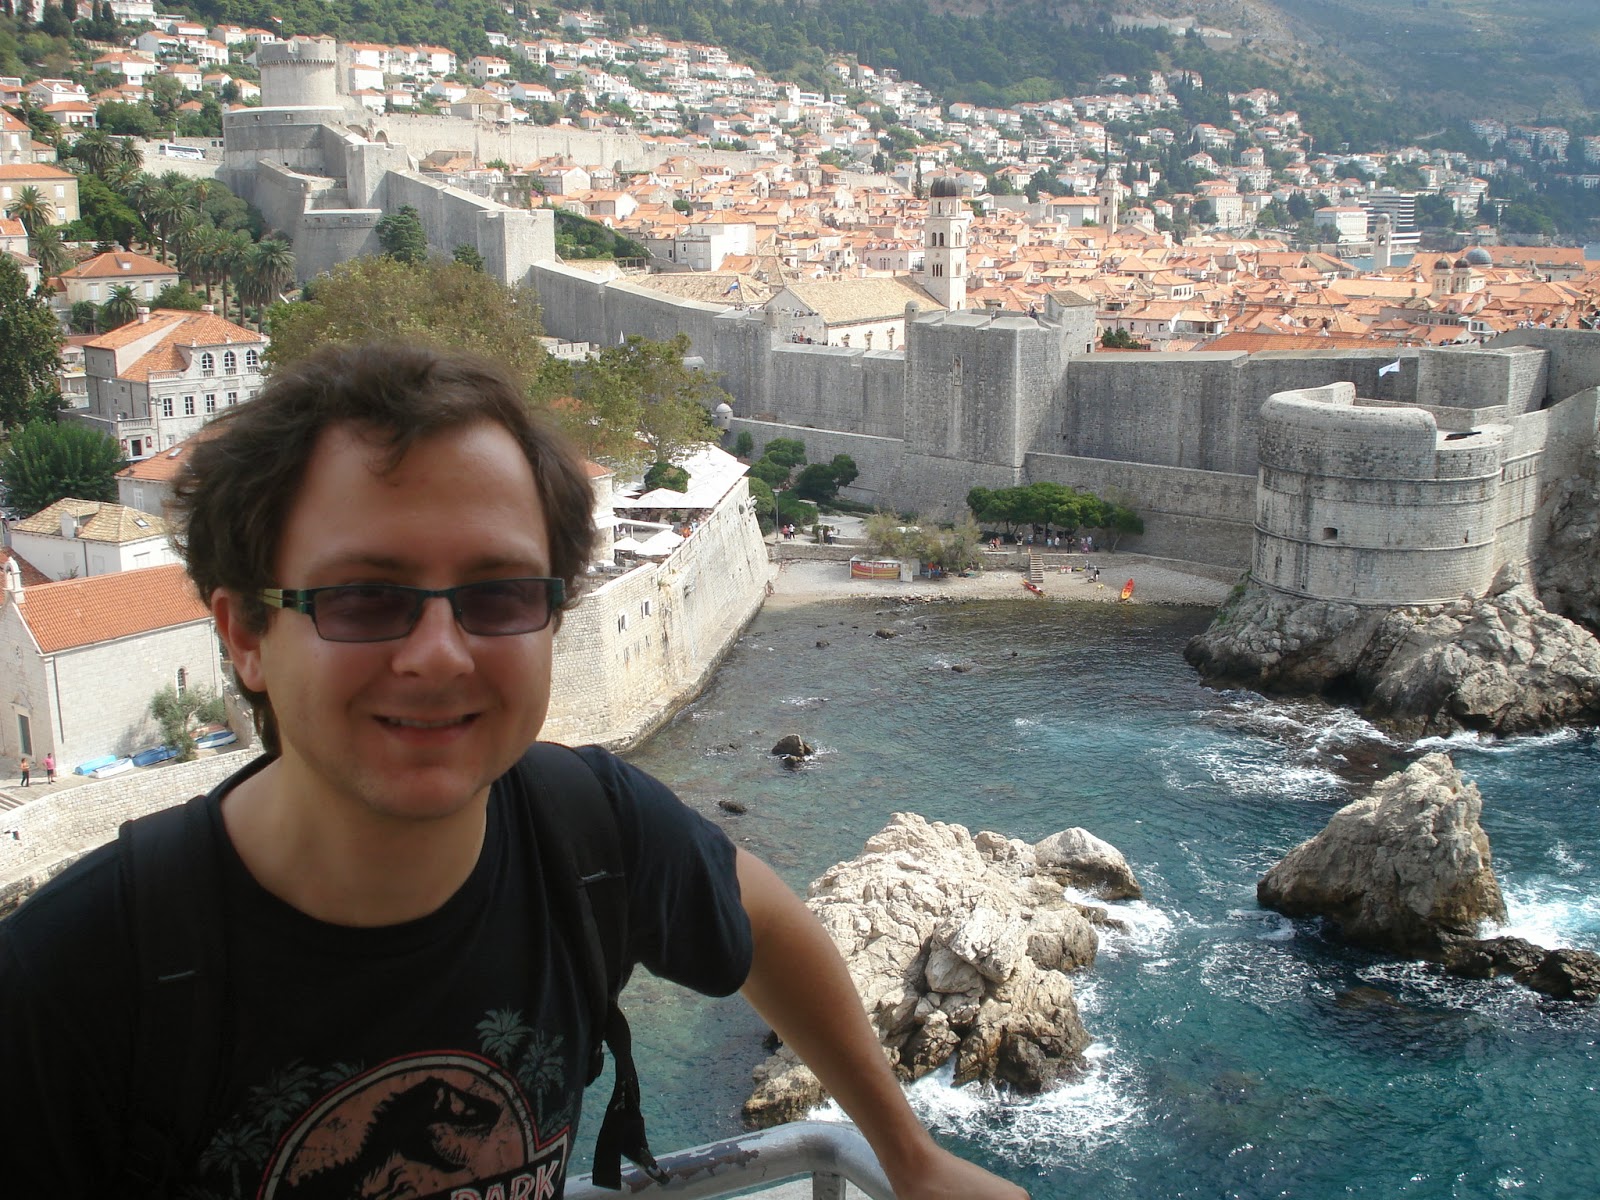 A view from the fortified historical center of Dubrovnik (a.k.a. King's
Landing)